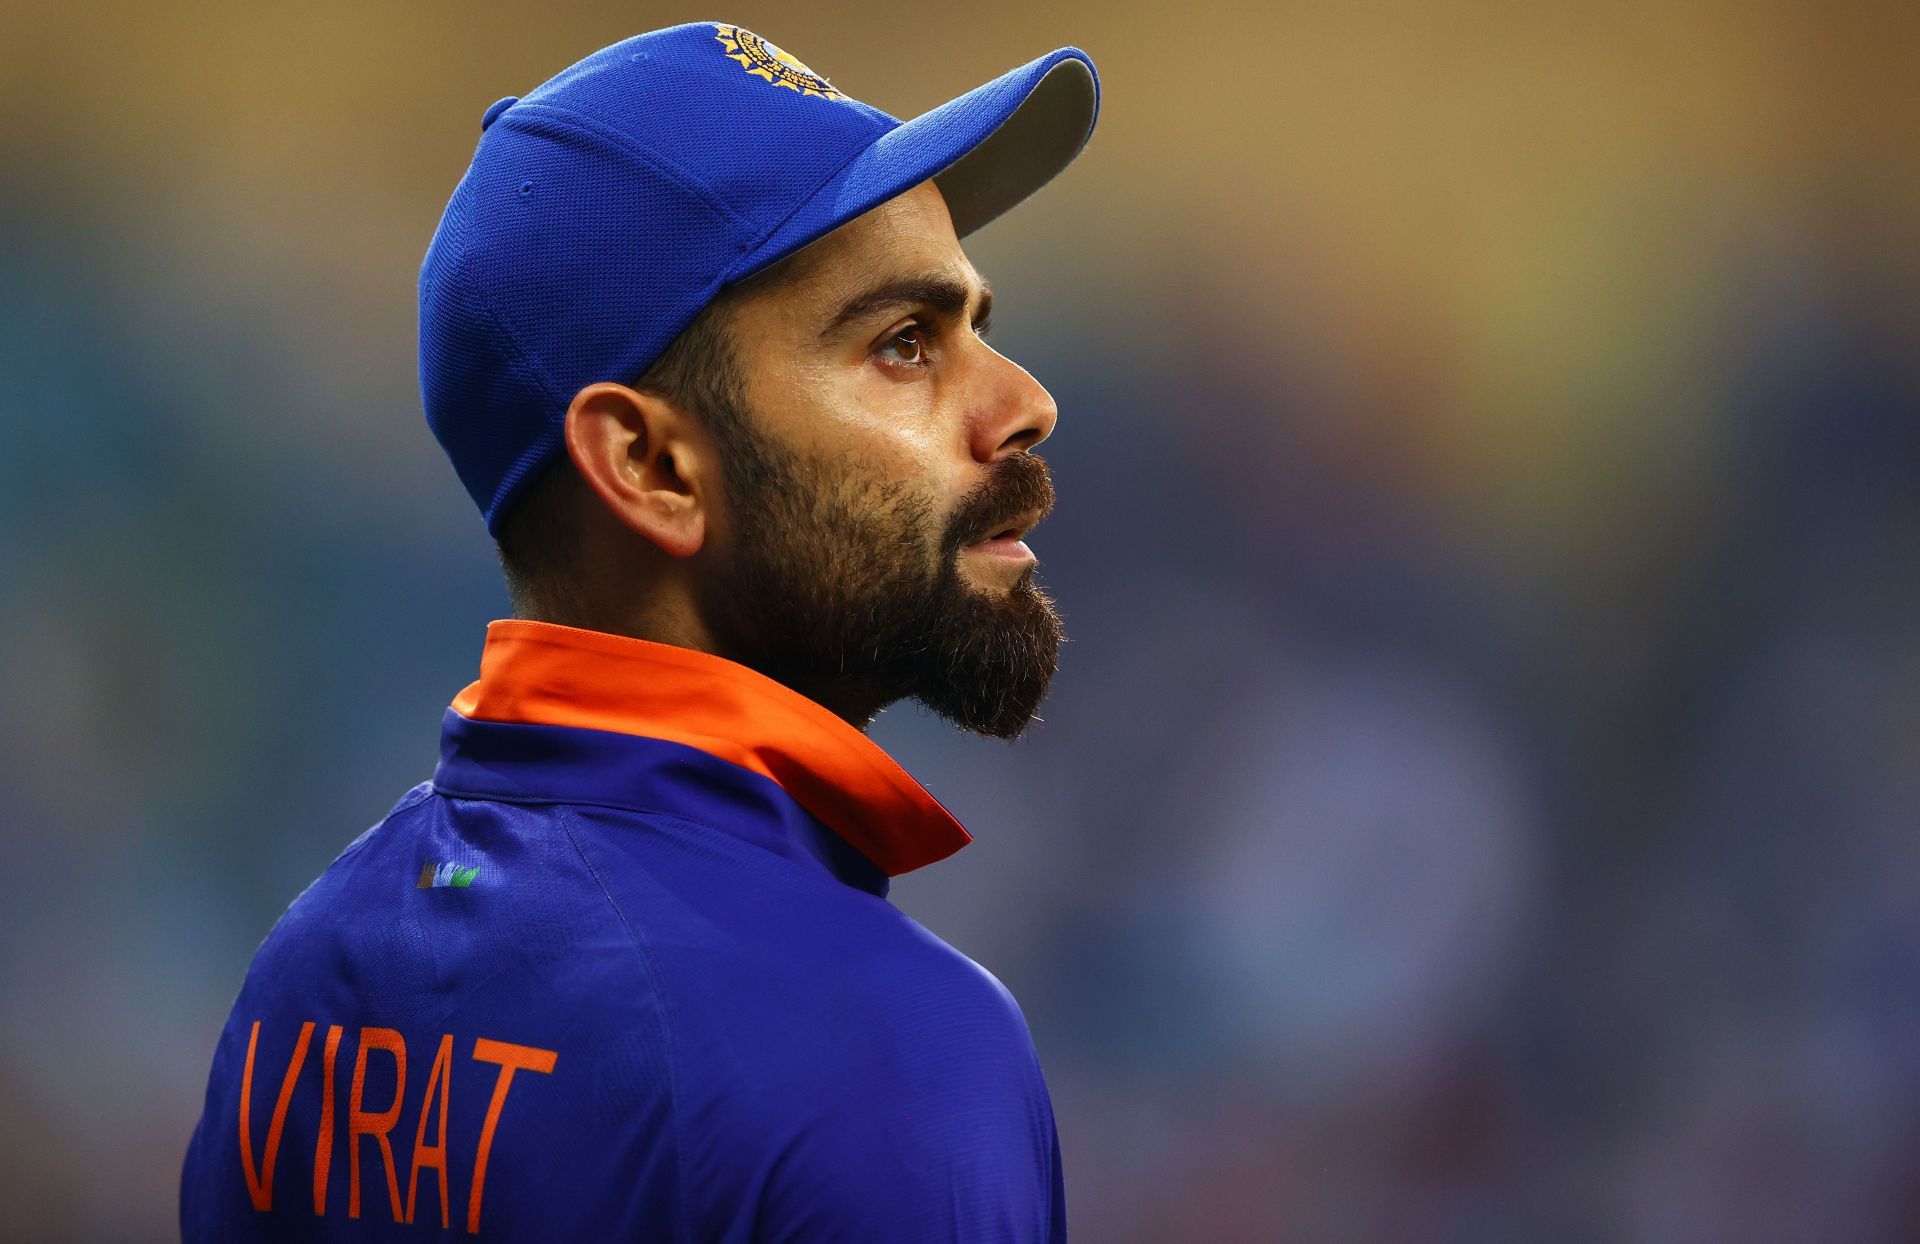 Virat Kohli will play his last ICC T20 World Cup match as the Indian captain tonight